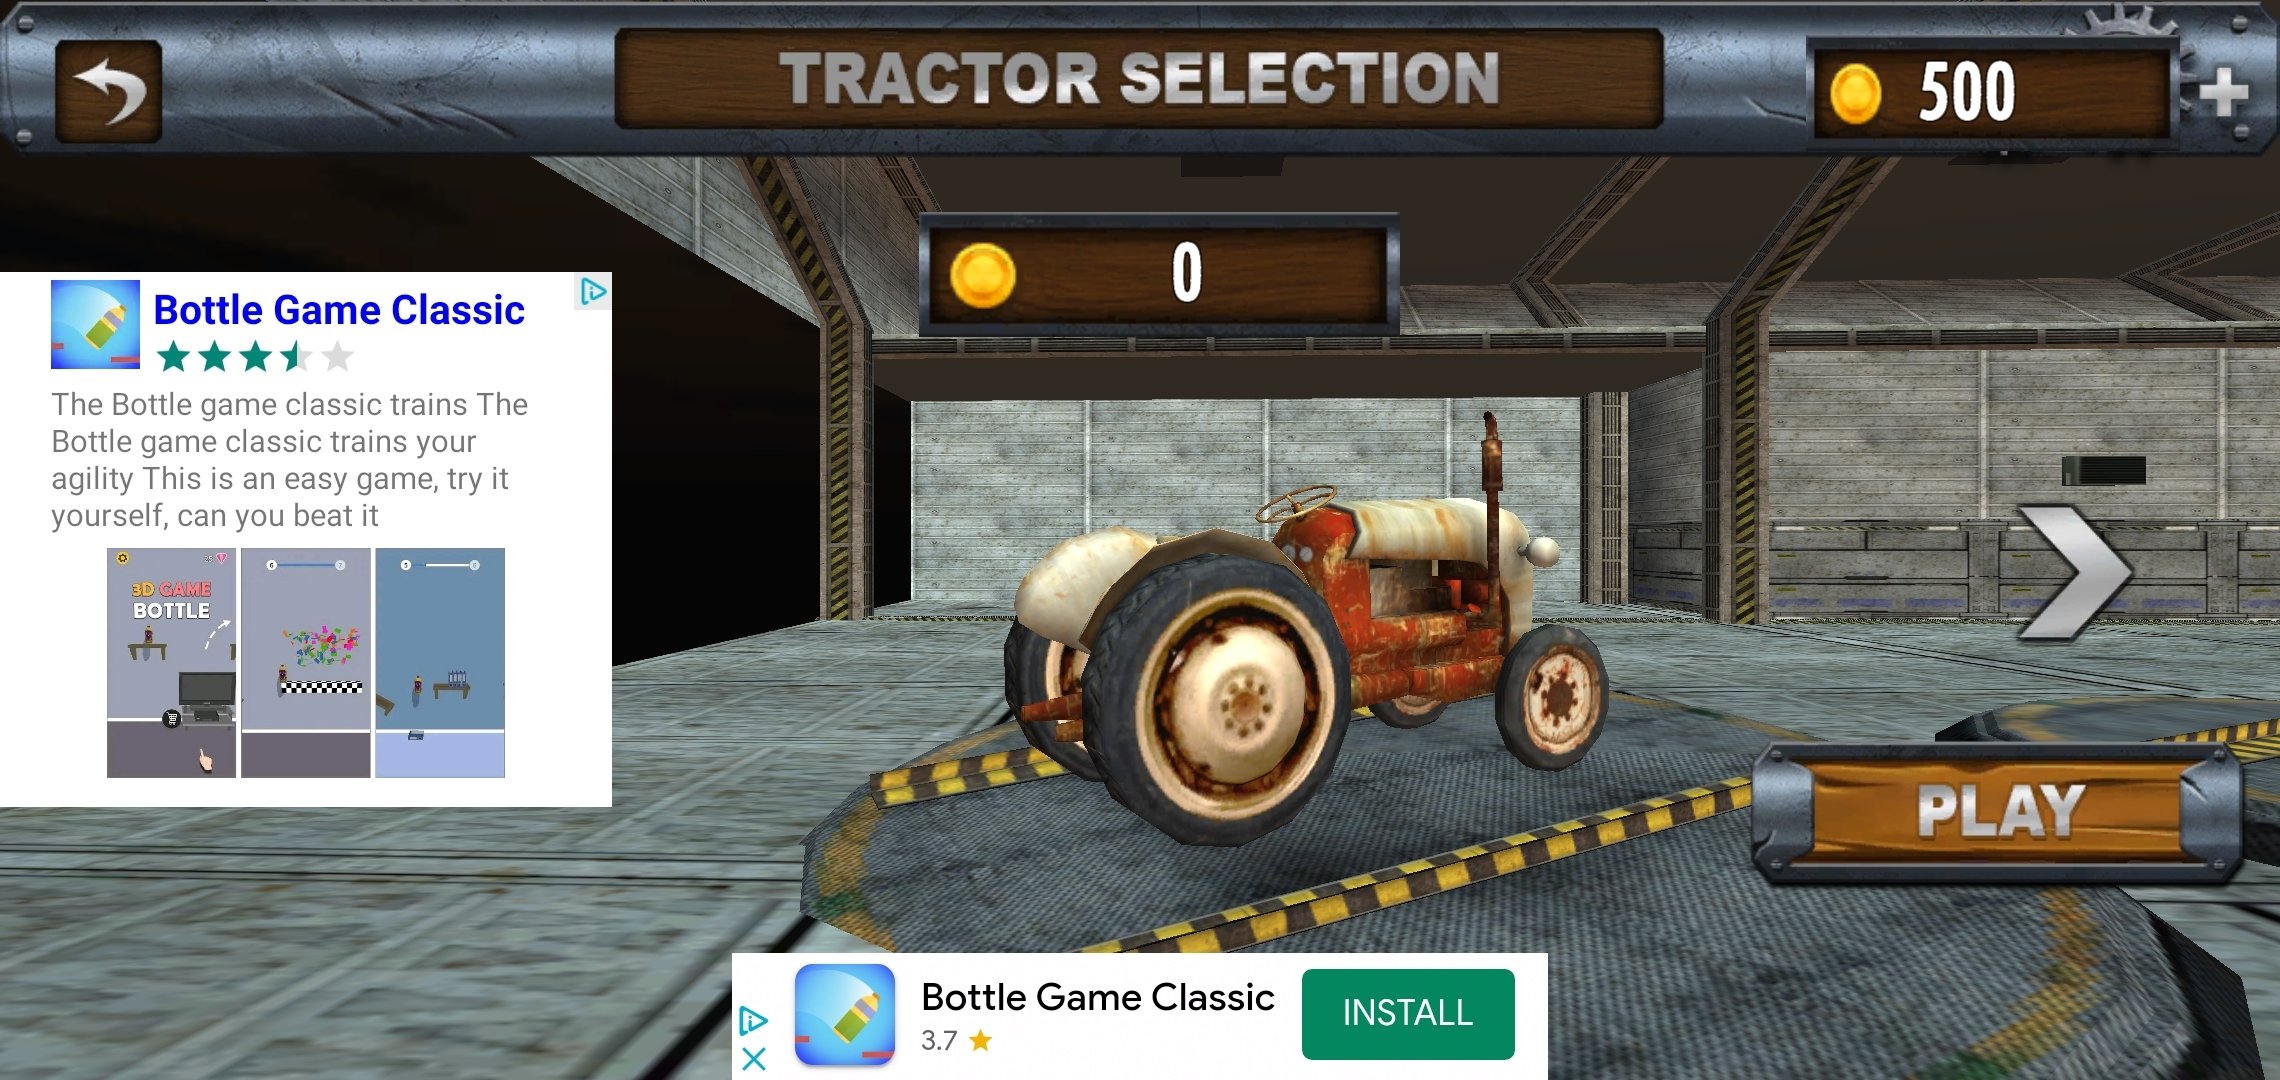 which equipment can be attached at the front of a tractor in farming simulator 14